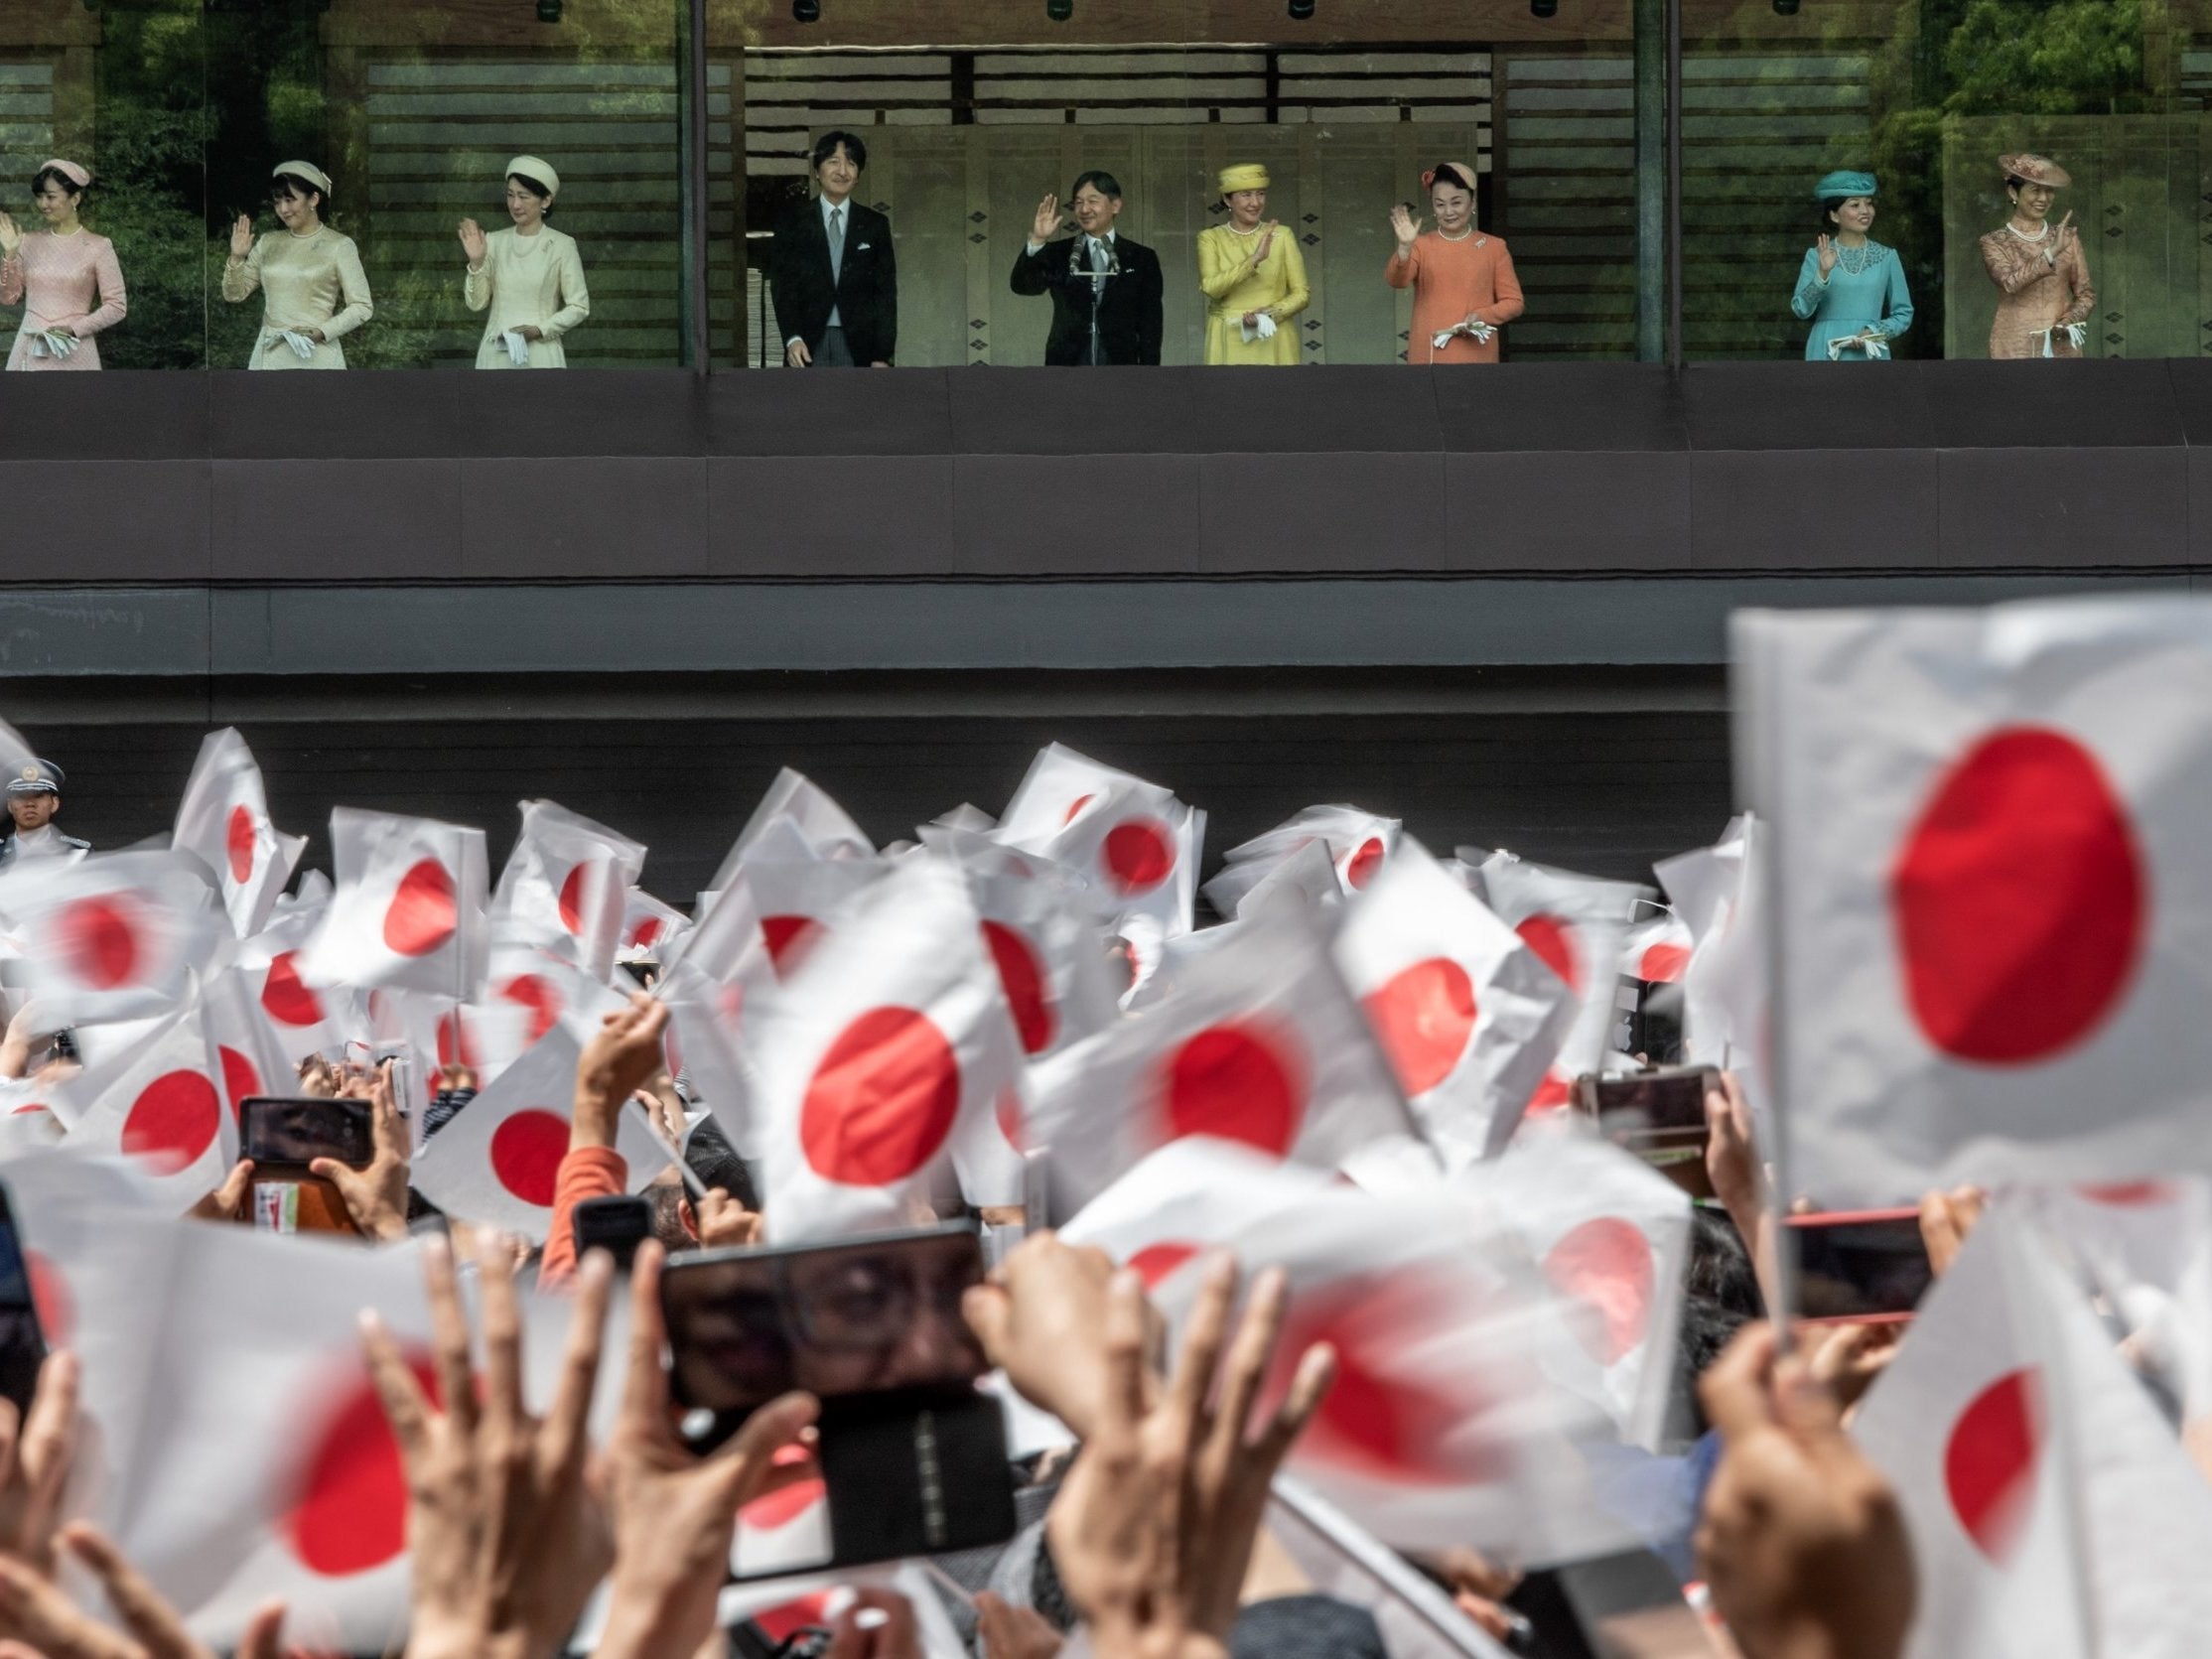 Emperor Naruhito's appointment has been welcomed by his country yet his succession shows an ongoing, troubling tradition in Japan